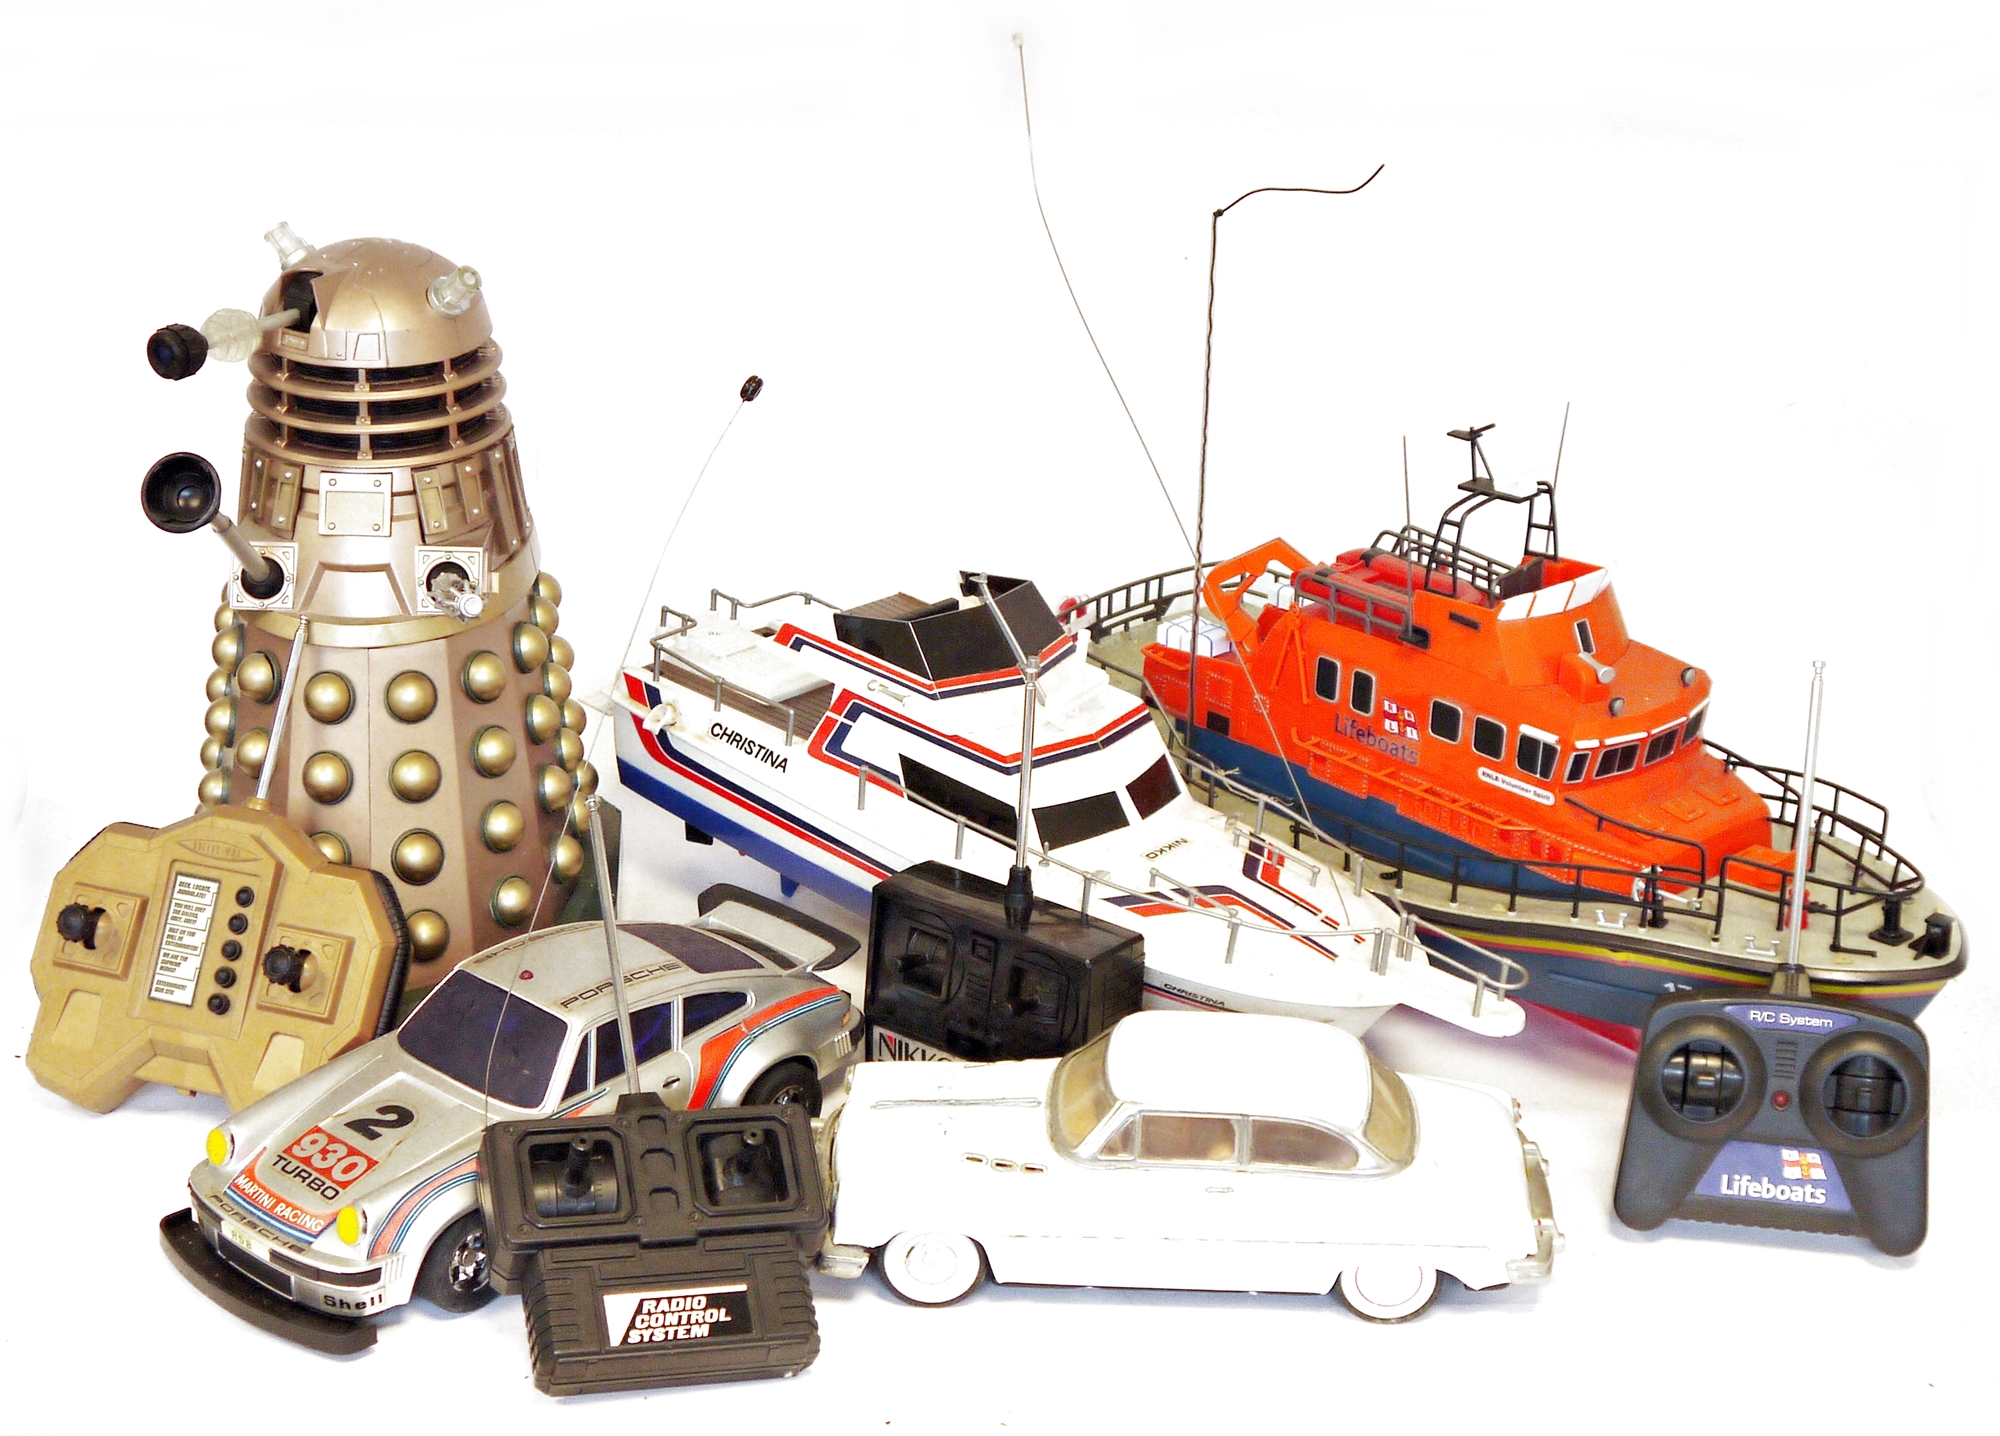 A remoted control model of a lifeboat, a remote control Porsche motor car, and other remoted control